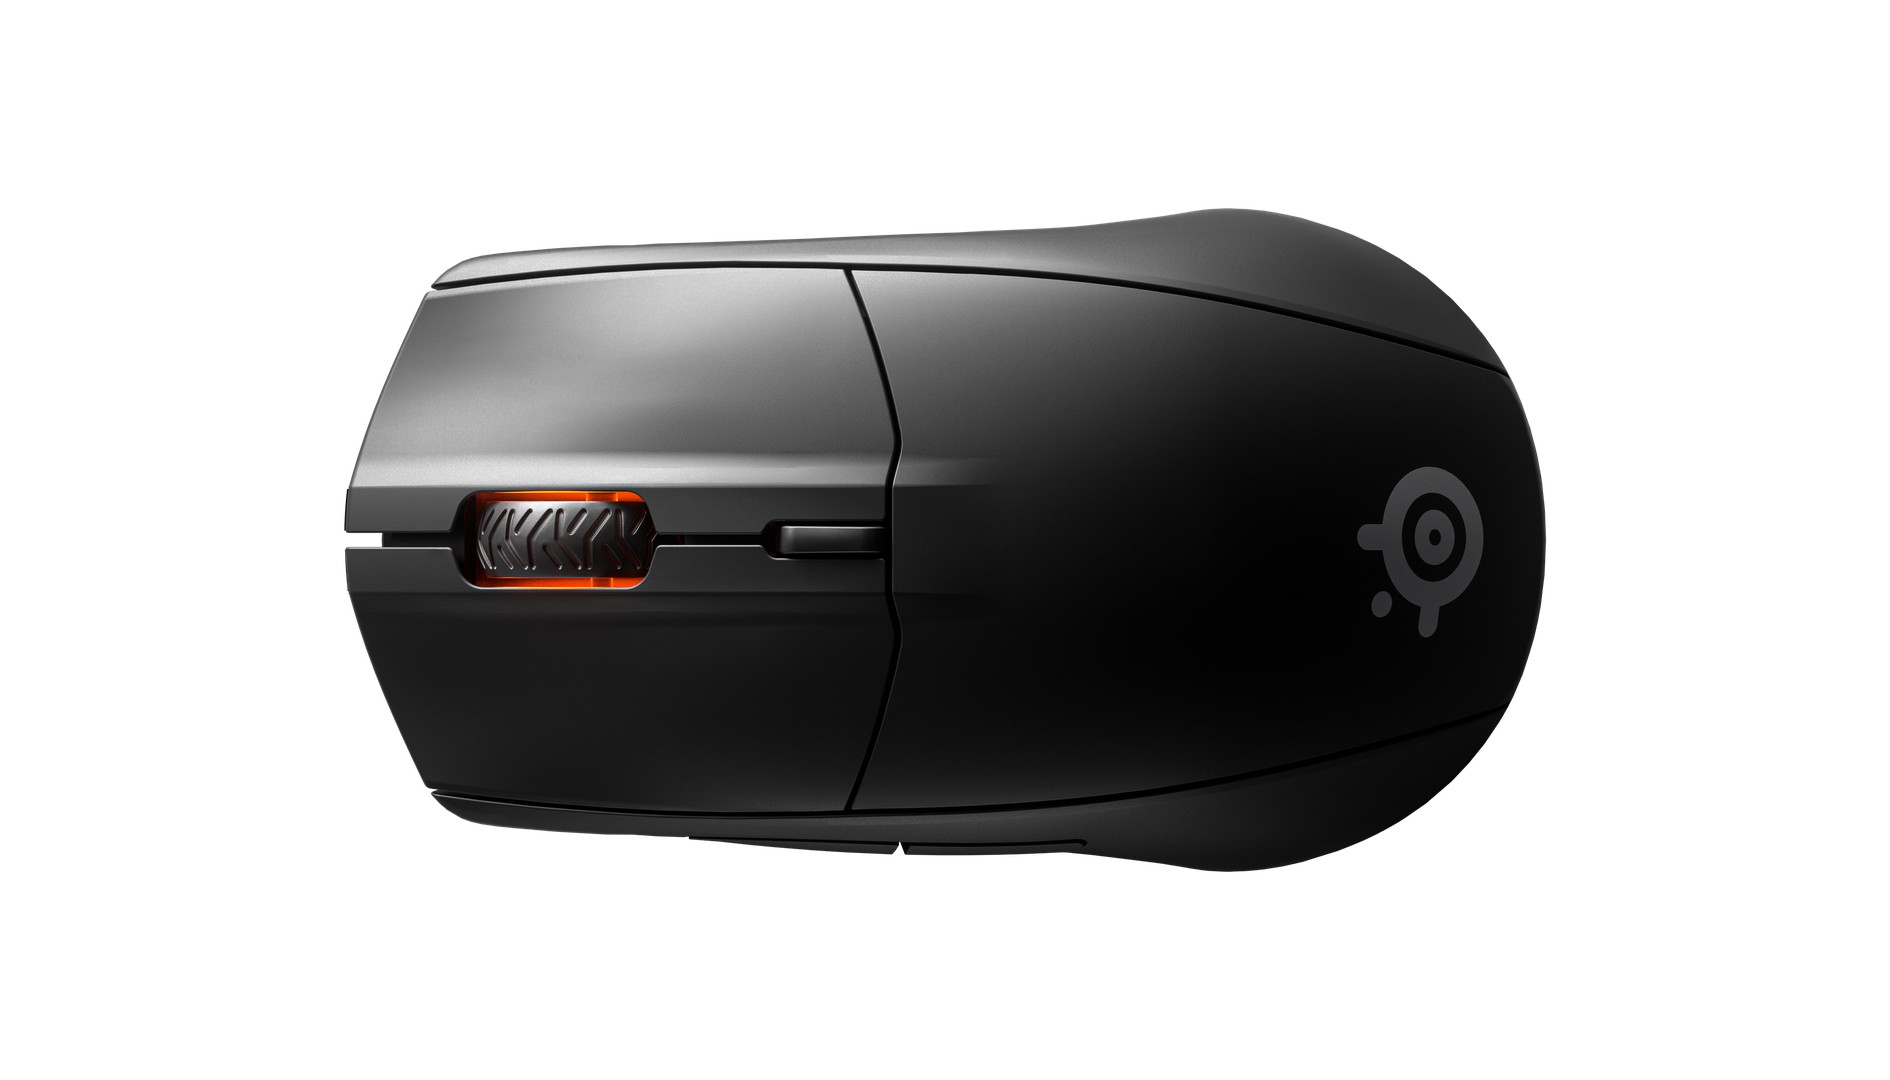 rival steelseries mouse